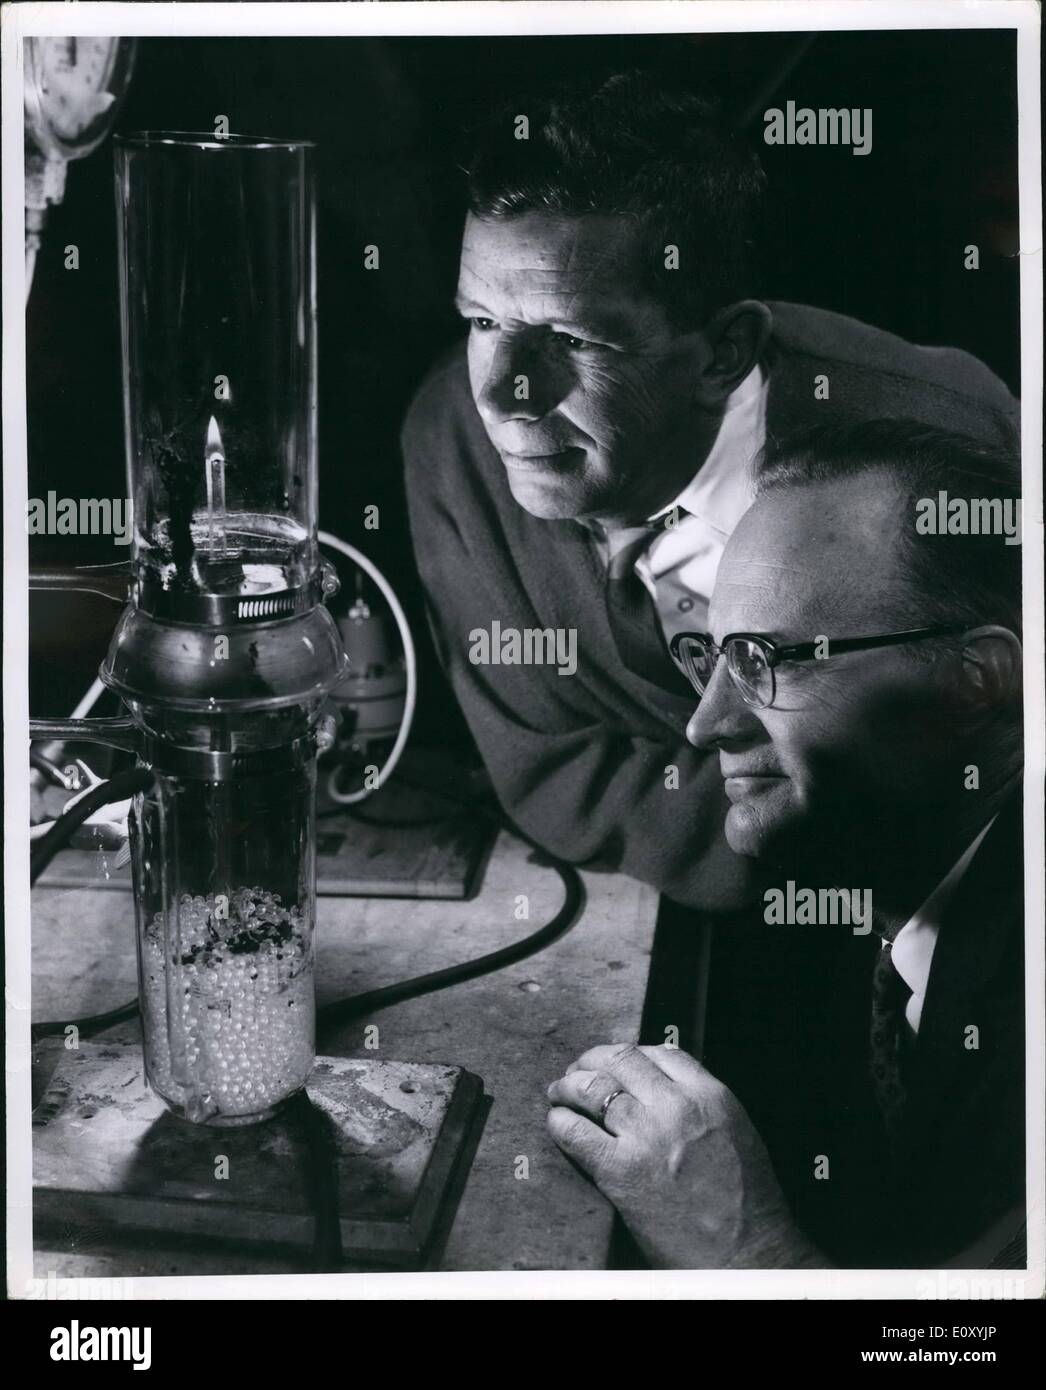 Feb. 02, 1968 - A highly sensitive and easily reproducible technique for determining the relative flammabilities of plastics and synthetic fabrics has been developed by two scientists at the General Electric Research and Development Center. Developed by Drs. Charles P. Fenimore ( left ) and Frederick J. Martin, the new technique utilizes a simple, compact apparatus in which samples are burned in a ''candle-like'' manner in combinations of selected gases to determine the minimum oxygen concentration that will support burning Stock Photo